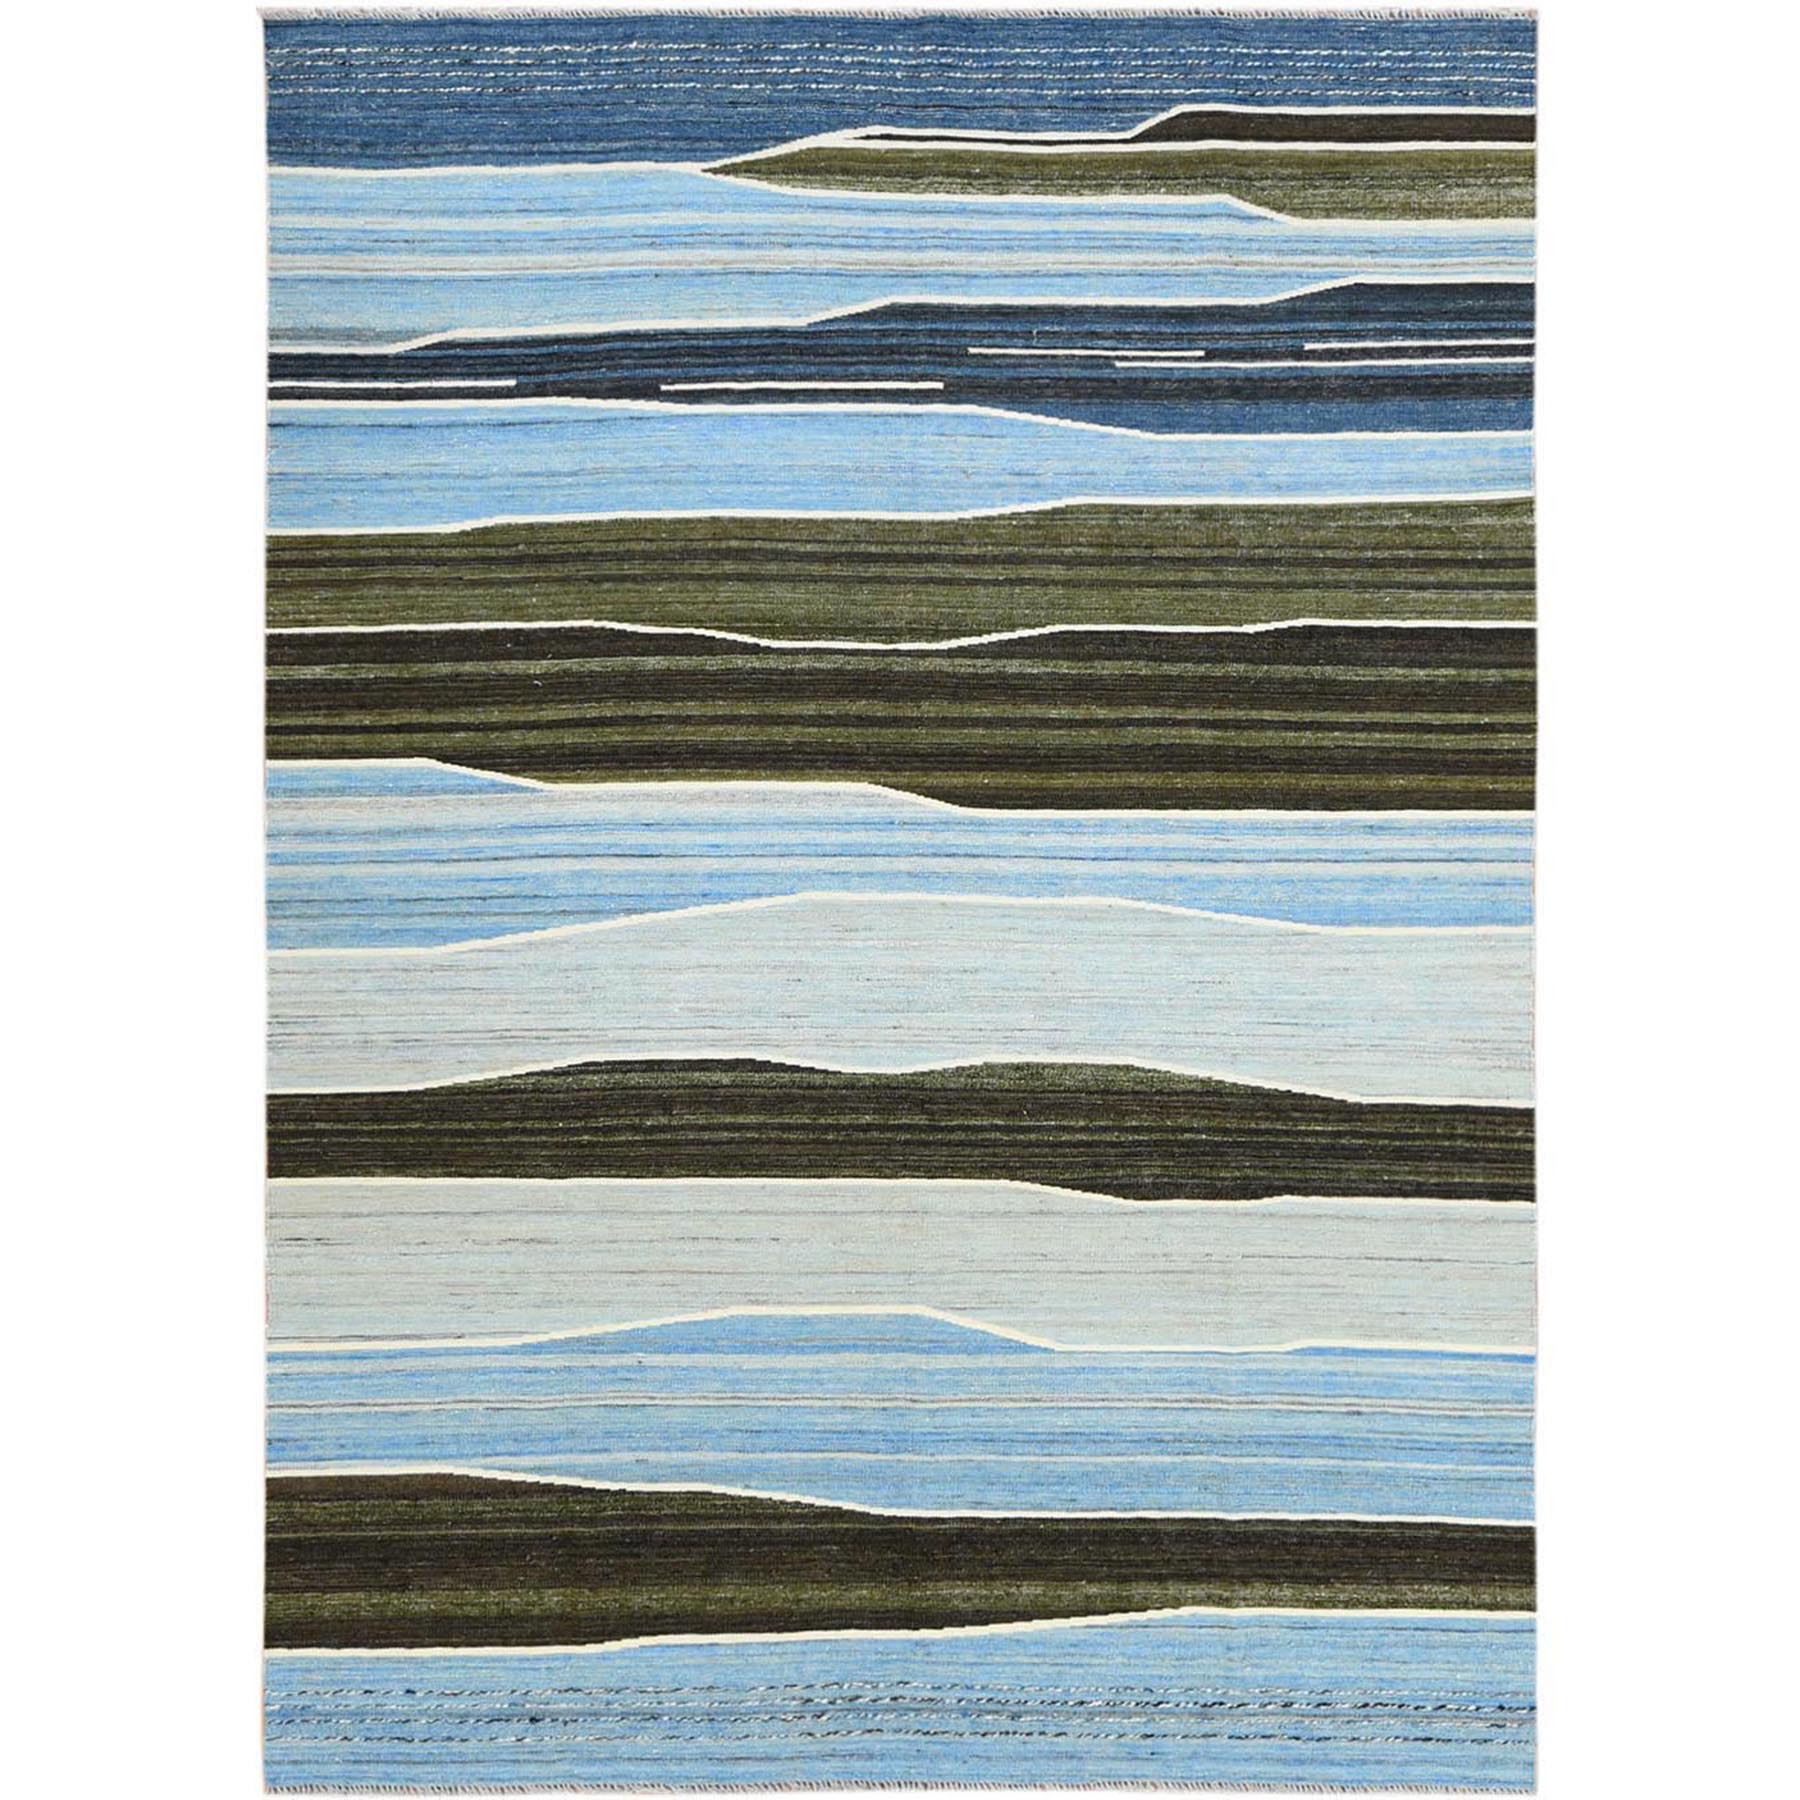 Modern & Contemporary Wool Hand-Woven Area Rug 6'3